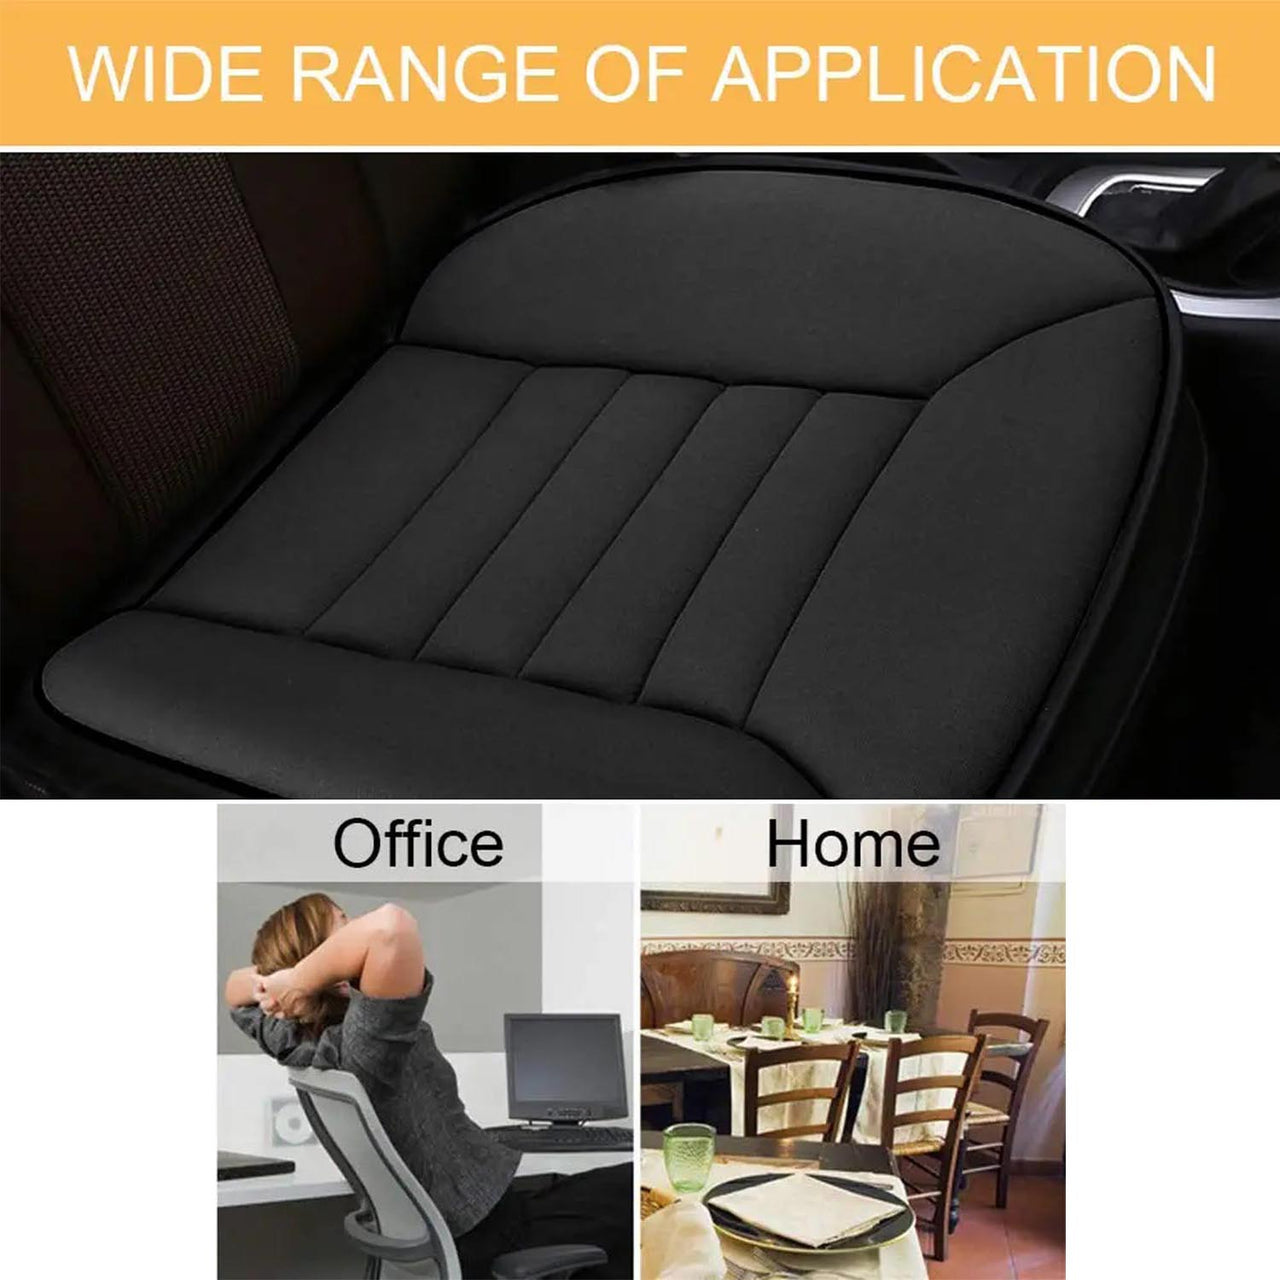 Car Seat Cushion with 1.2inch Comfort Memory Foam, Custom Logo For Your Cars, Seat Cushion for Car and Office Chair NS19989